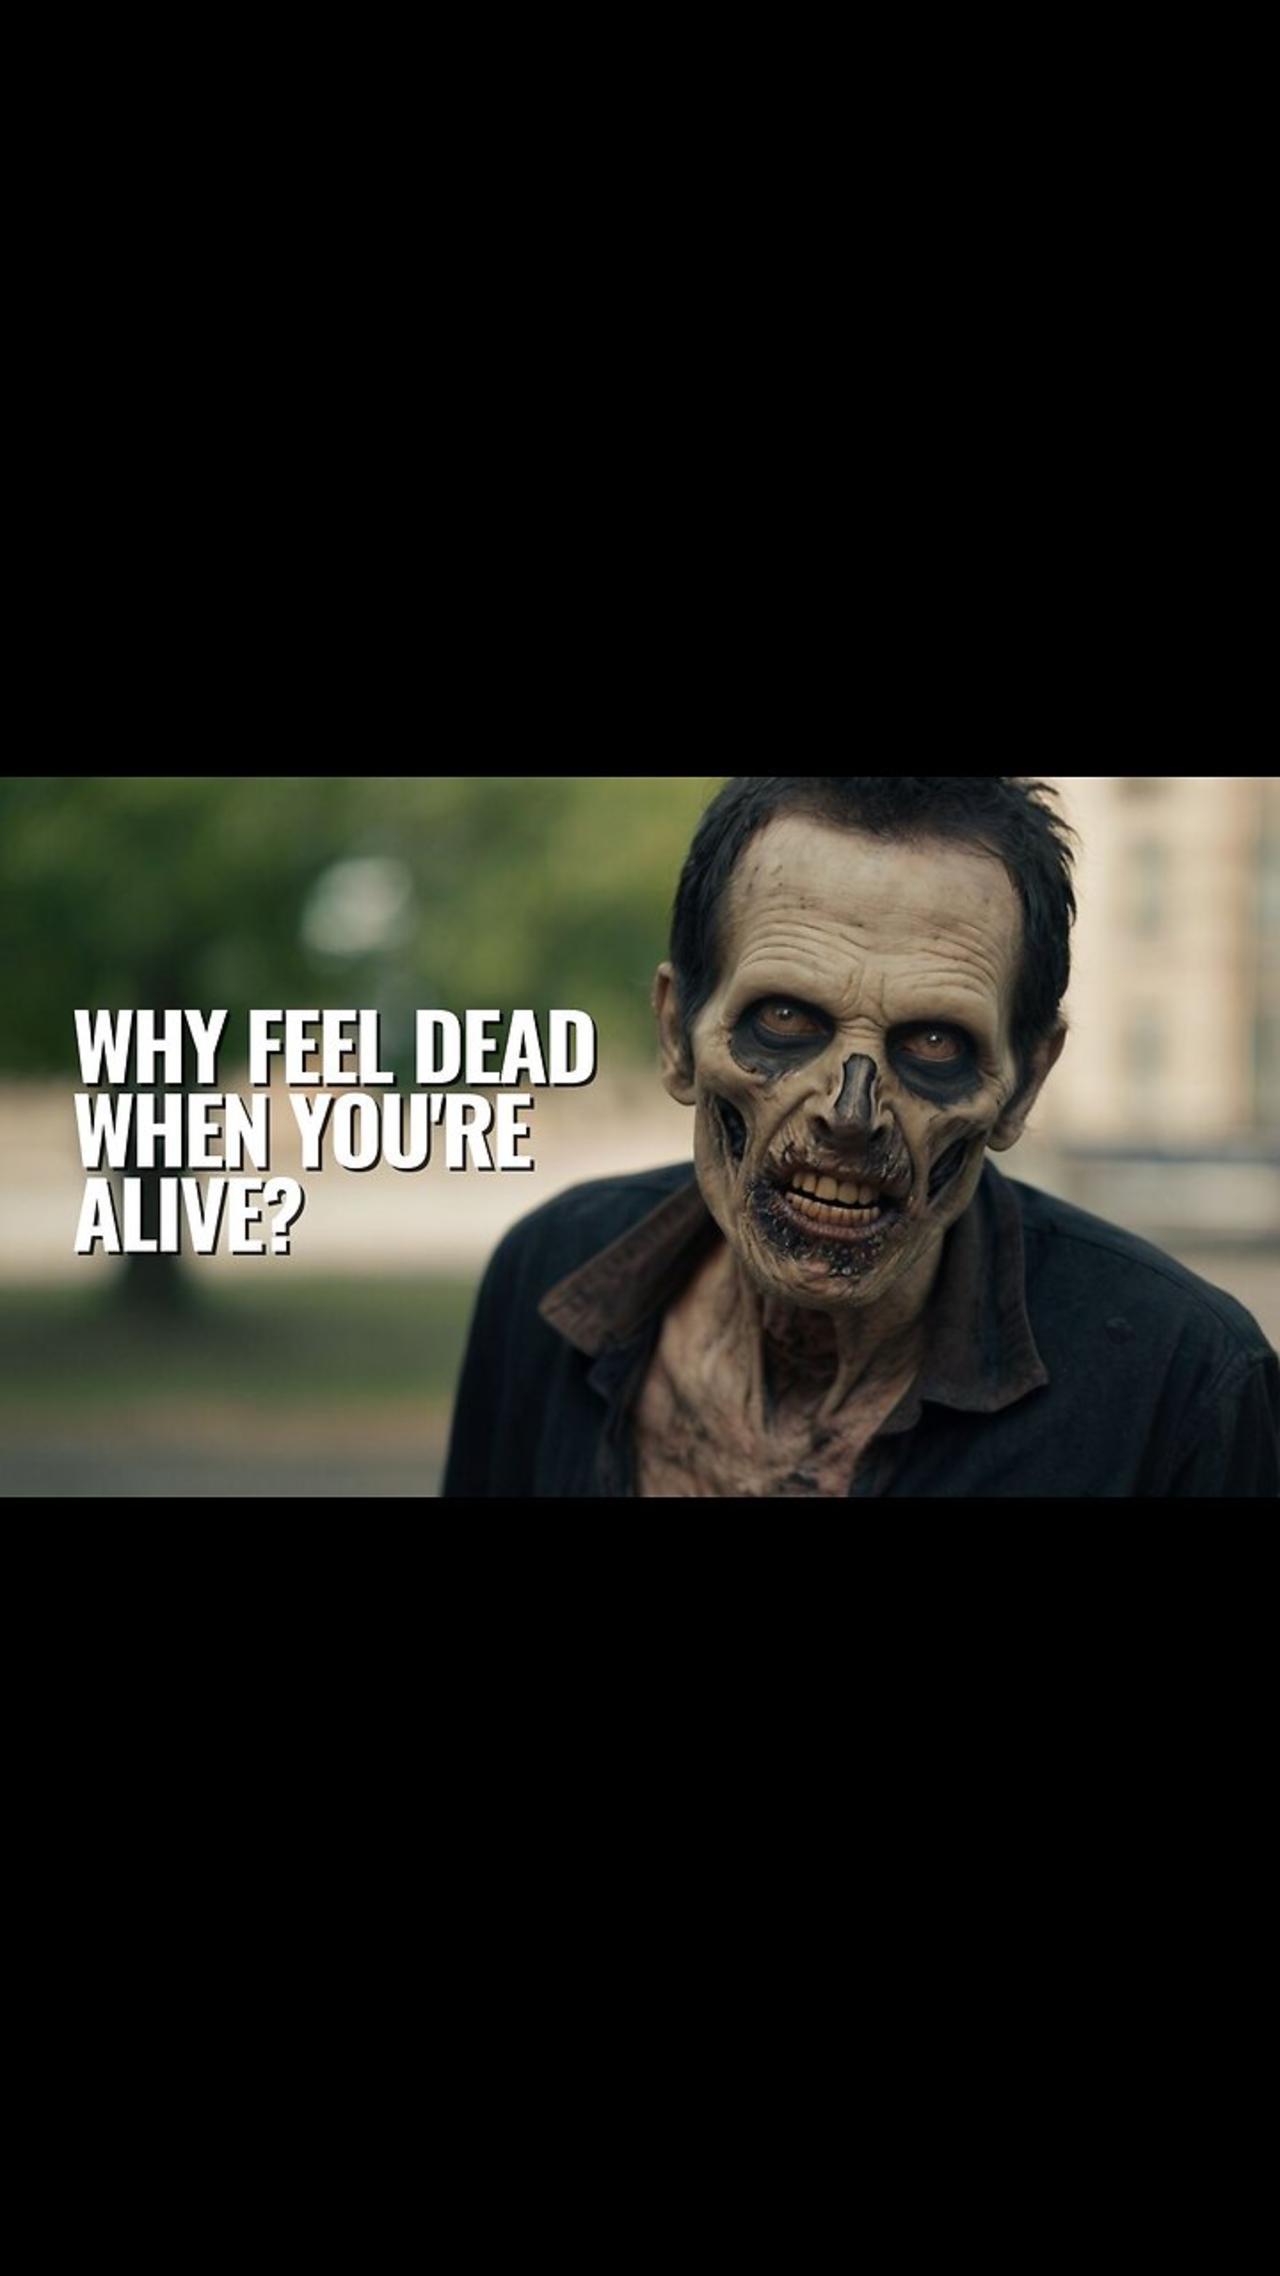 Why Feel Dead When You're Alive?